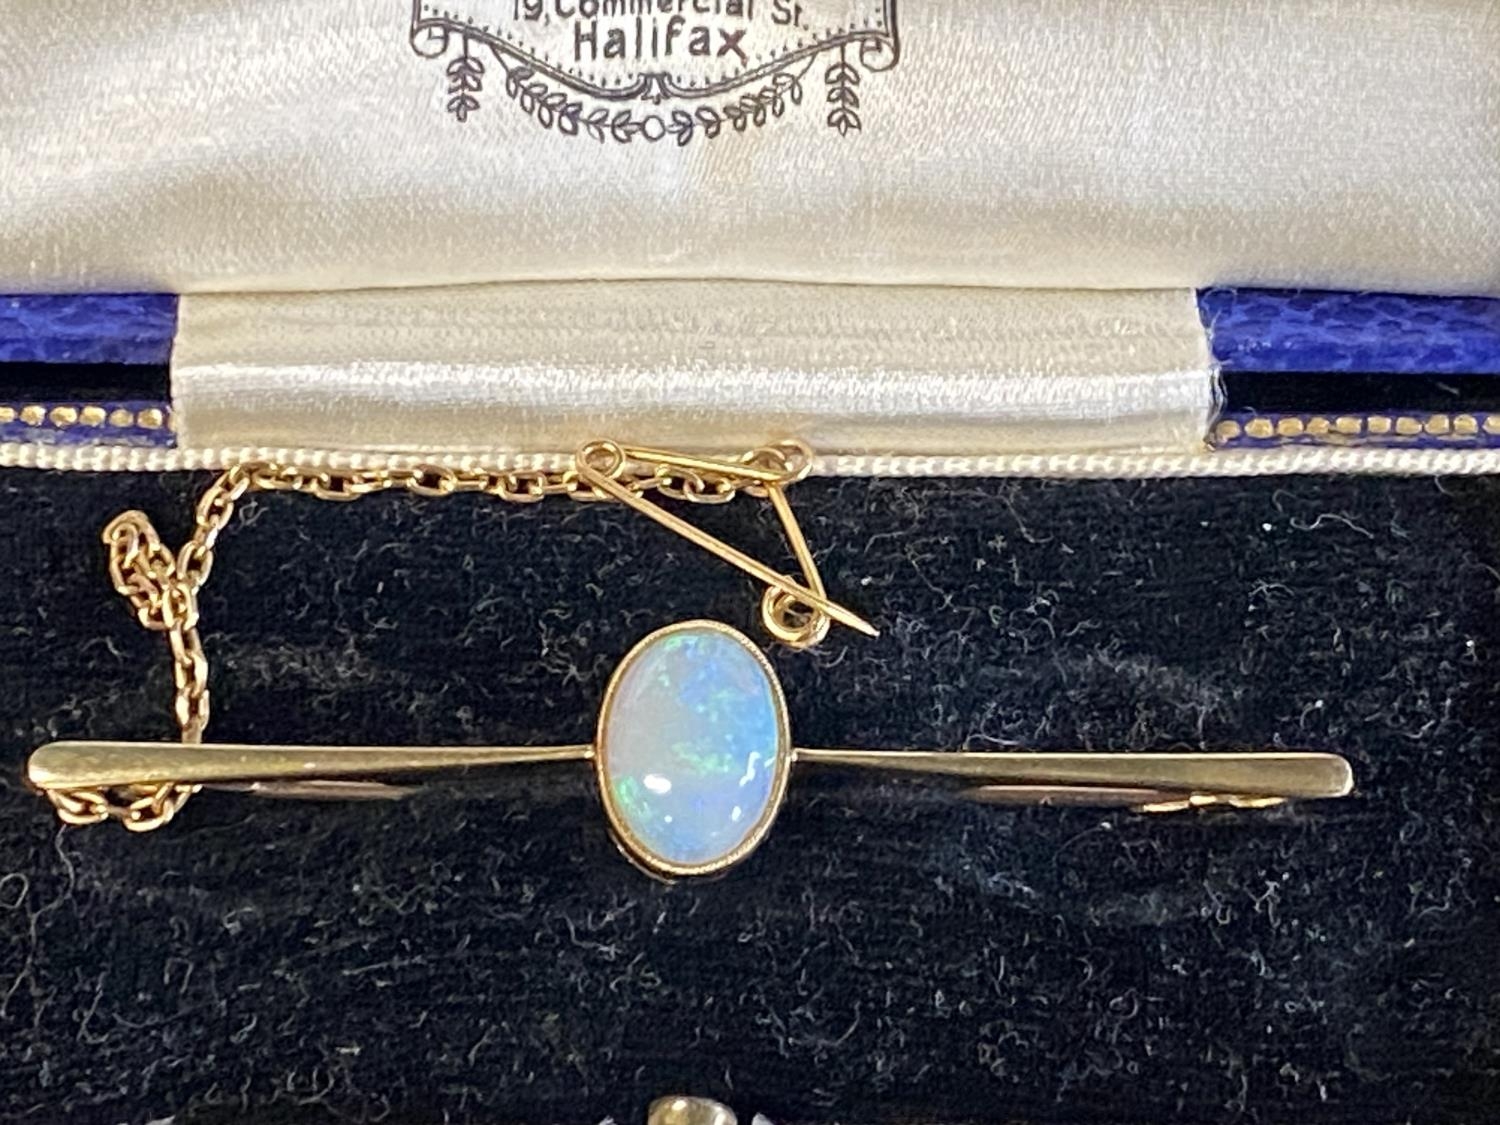 A 14ct gold and opal bar brooch in original box 4.10g